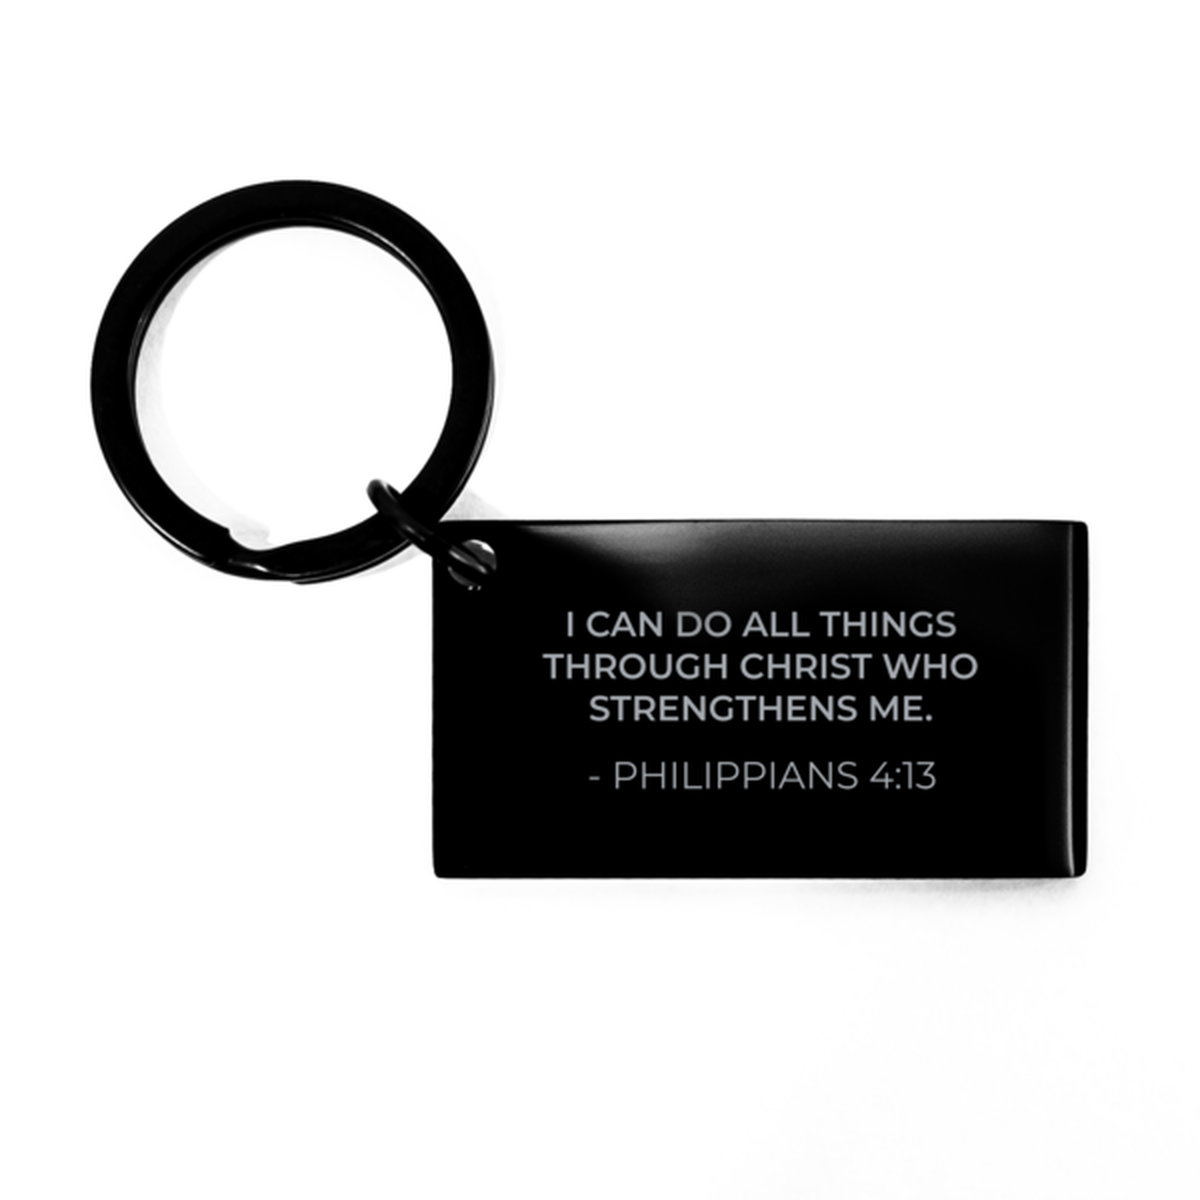 Bible Verse Black Keychain, Philippians 4:13 I Can Do All Things Through Christ Who, Christian Inspirational Key Ring Gifts For Men Women